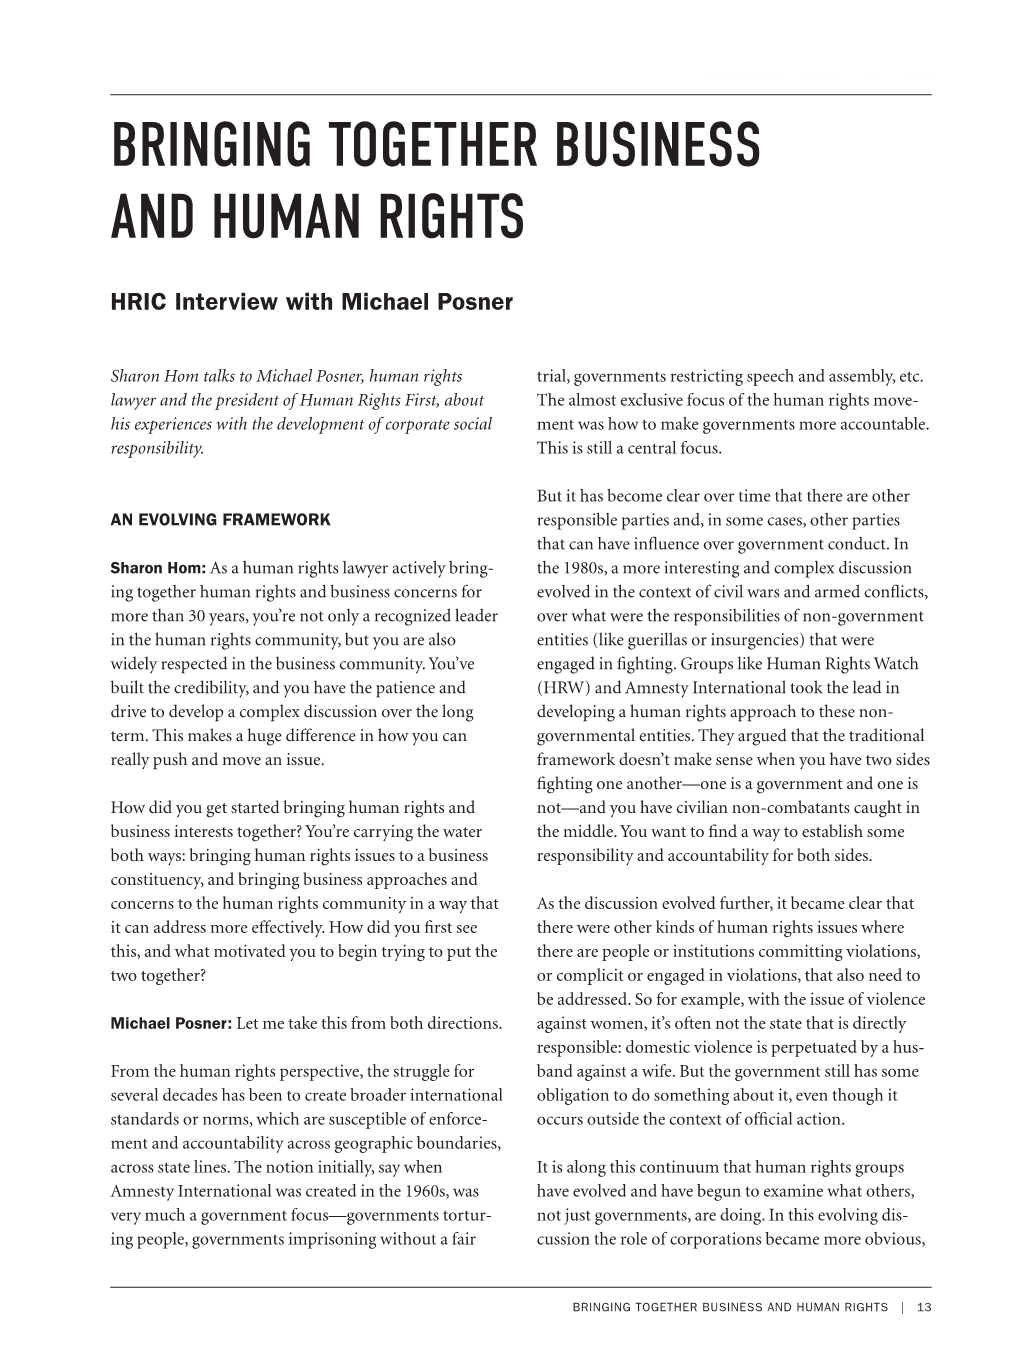 Bringing Together Business and Human Rights